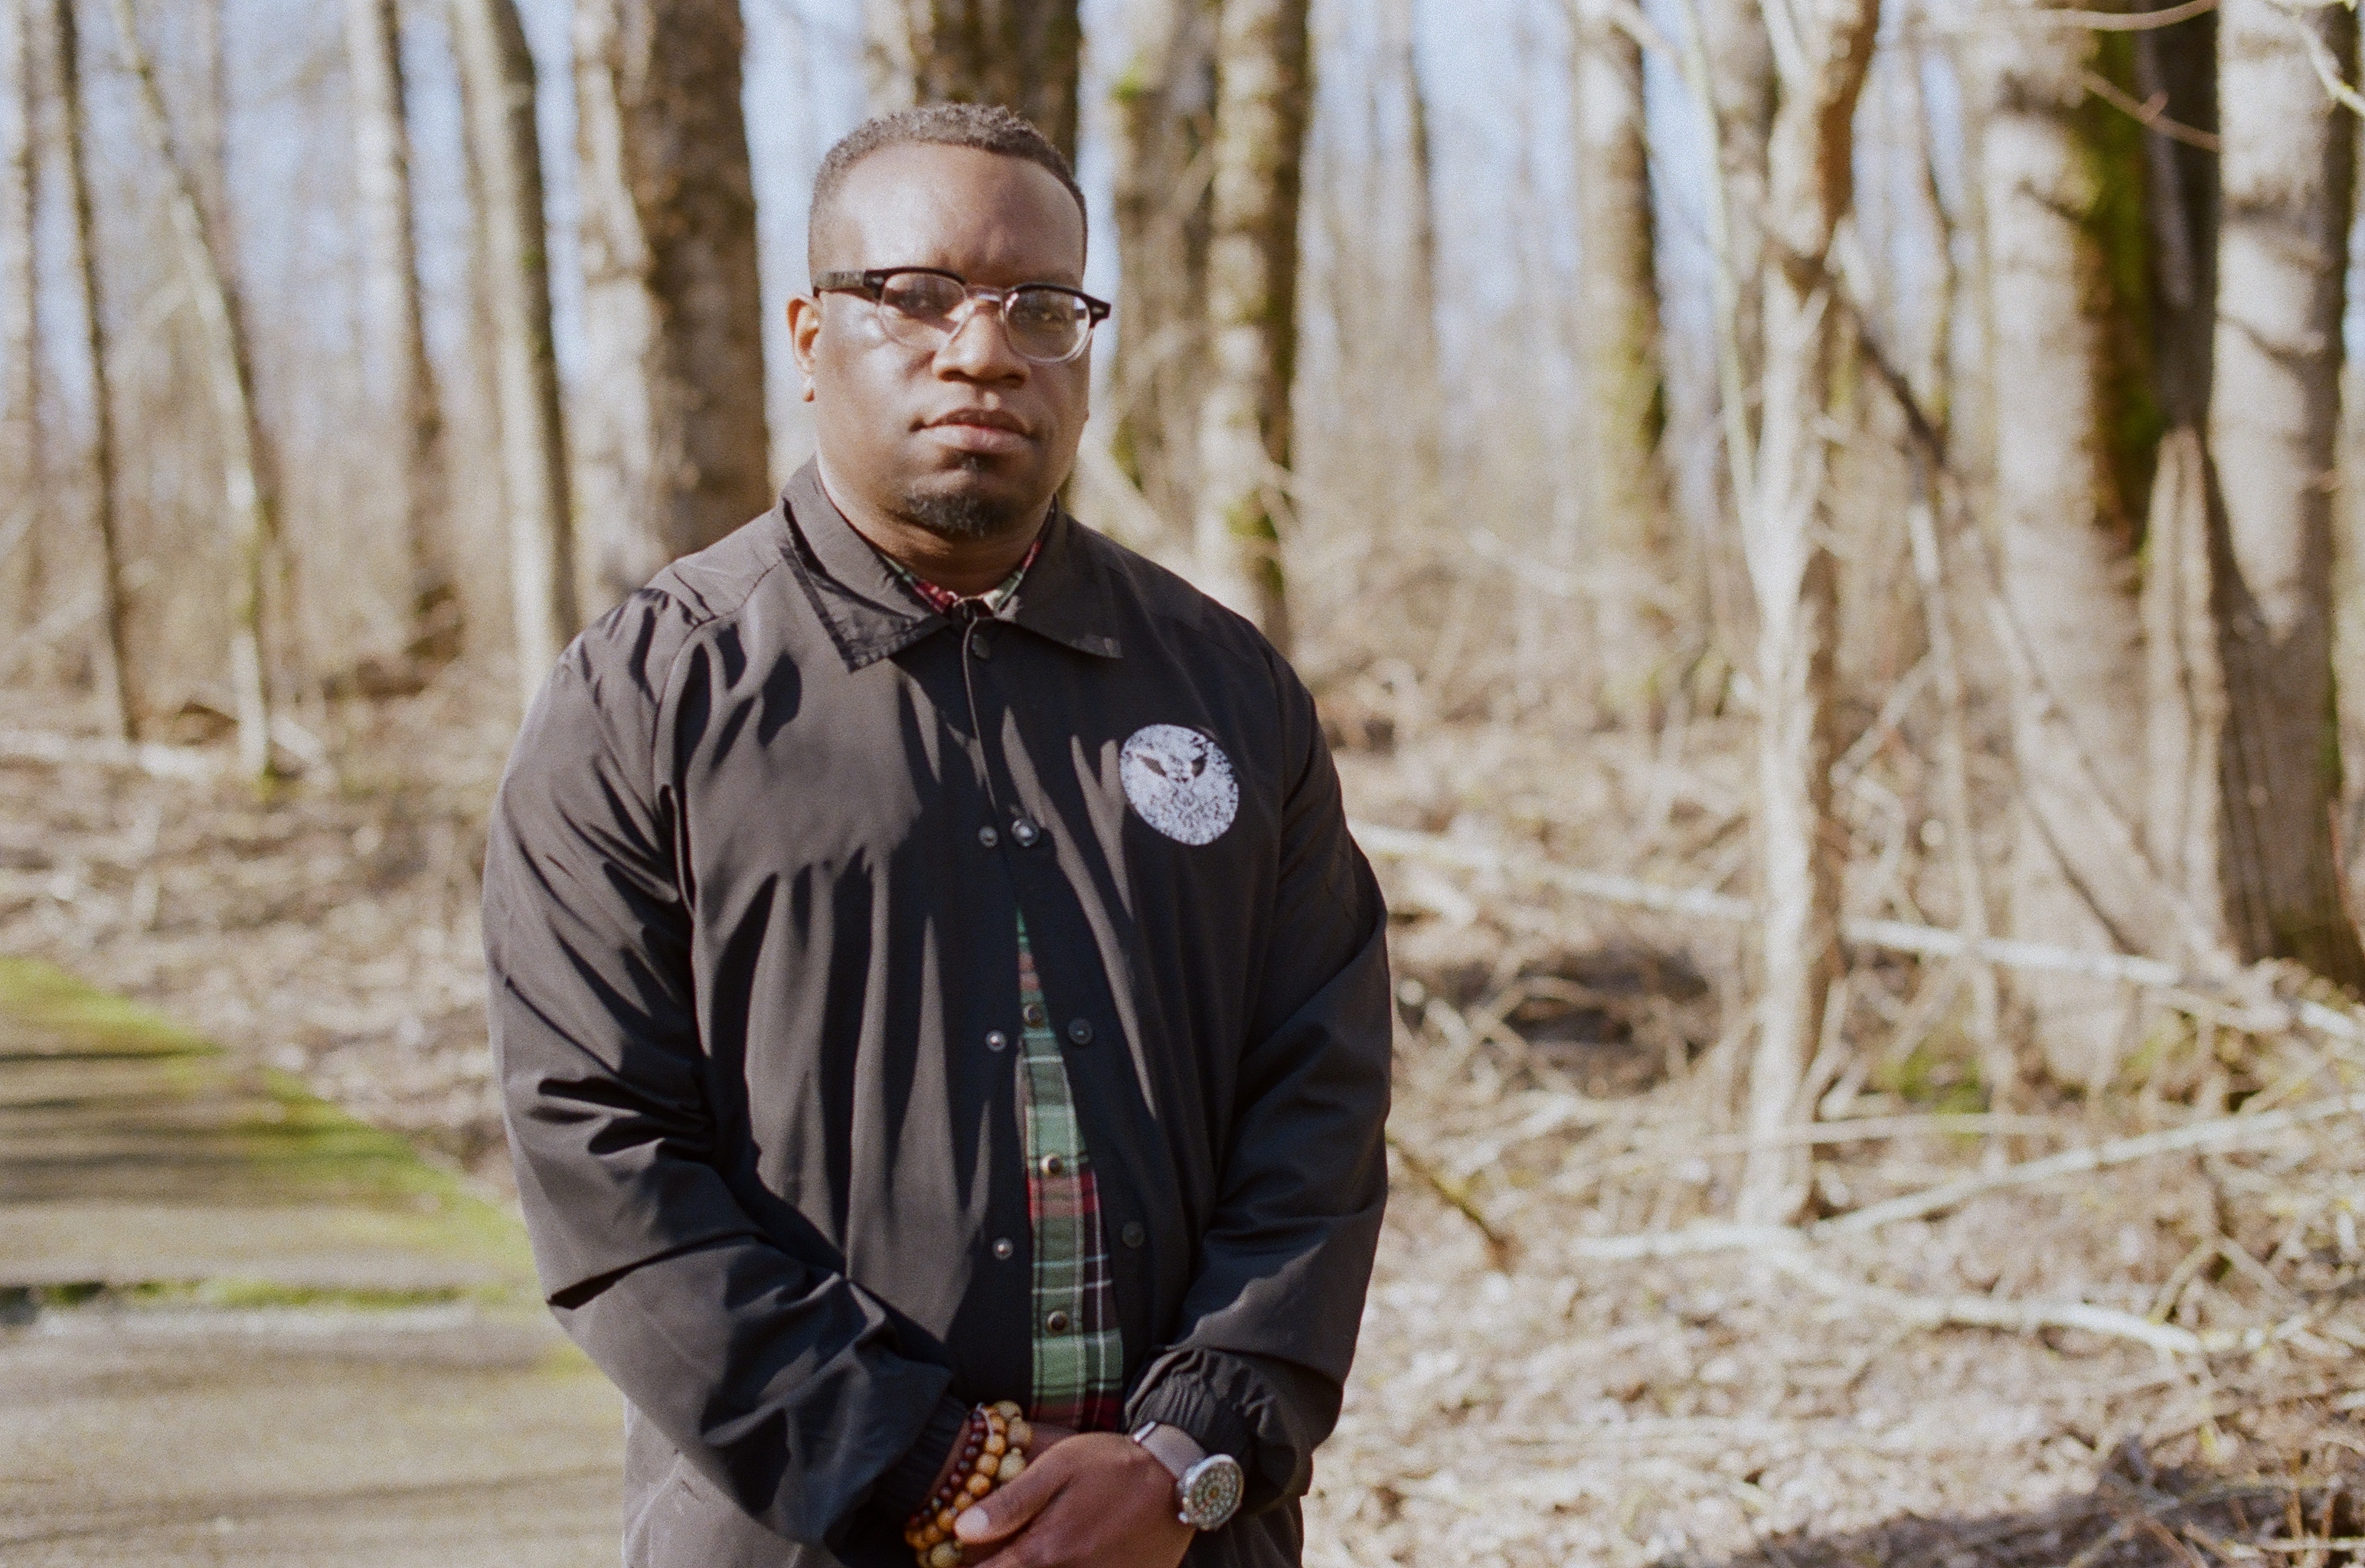 Darrell Wade stands with his held together in a wooded area. Portrait style.